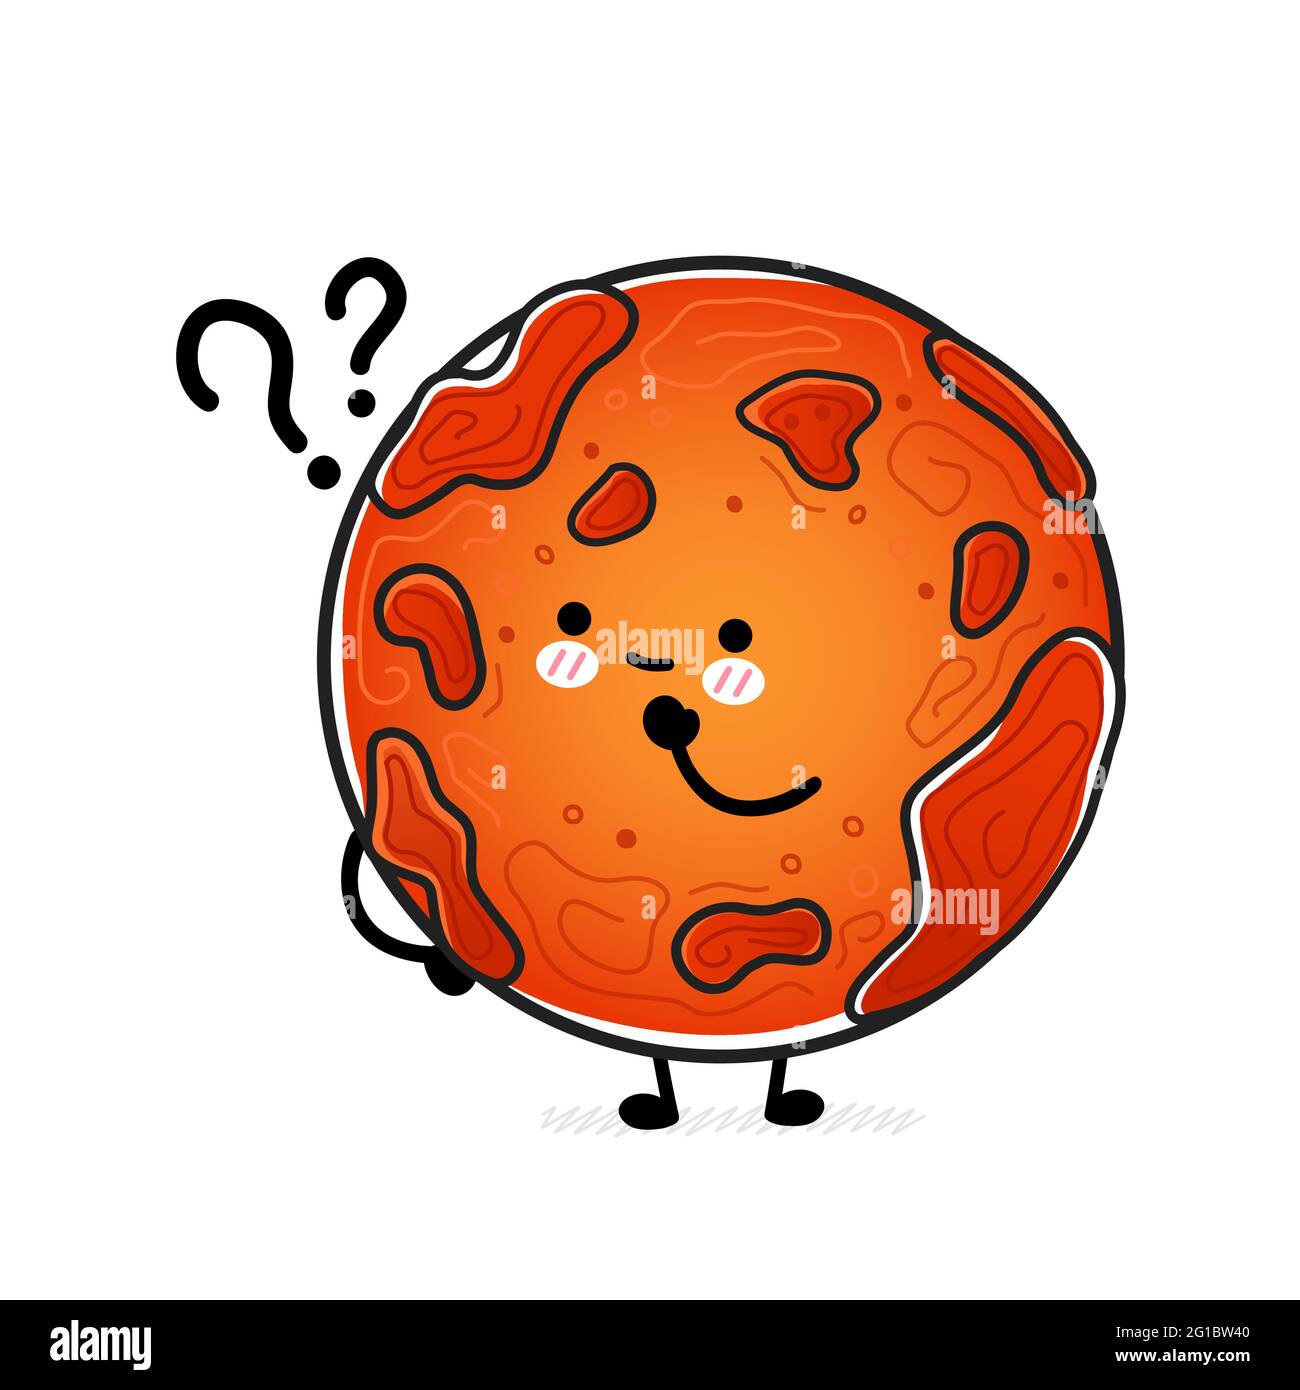 Cute funny happy Mars planet with question mark. Vector hand drawn cartoon kawaii character illustration icon. Isolated on white background. Space exploration, Mars planet cosmos character concept Stock Vector